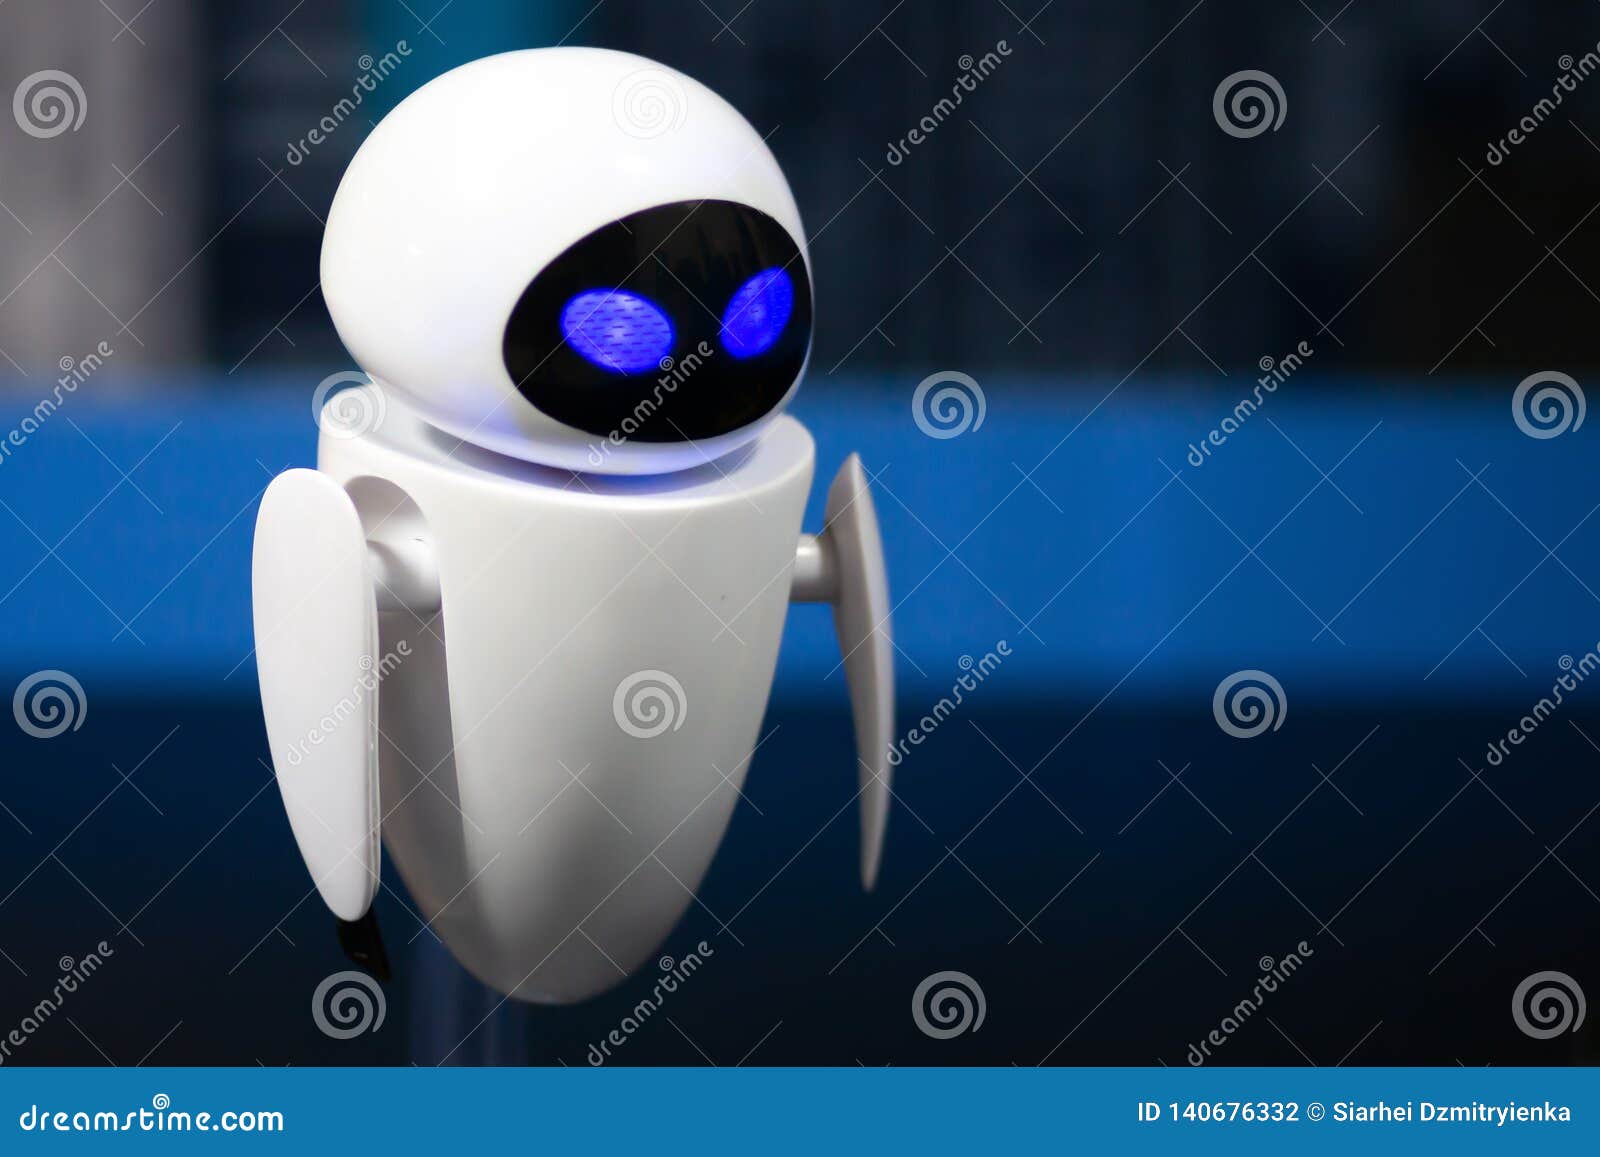 Eva Robot Toy Character Form Wall E Animation Film By Disney Pixar Studio Editorial Photography Image Of Technology Robots